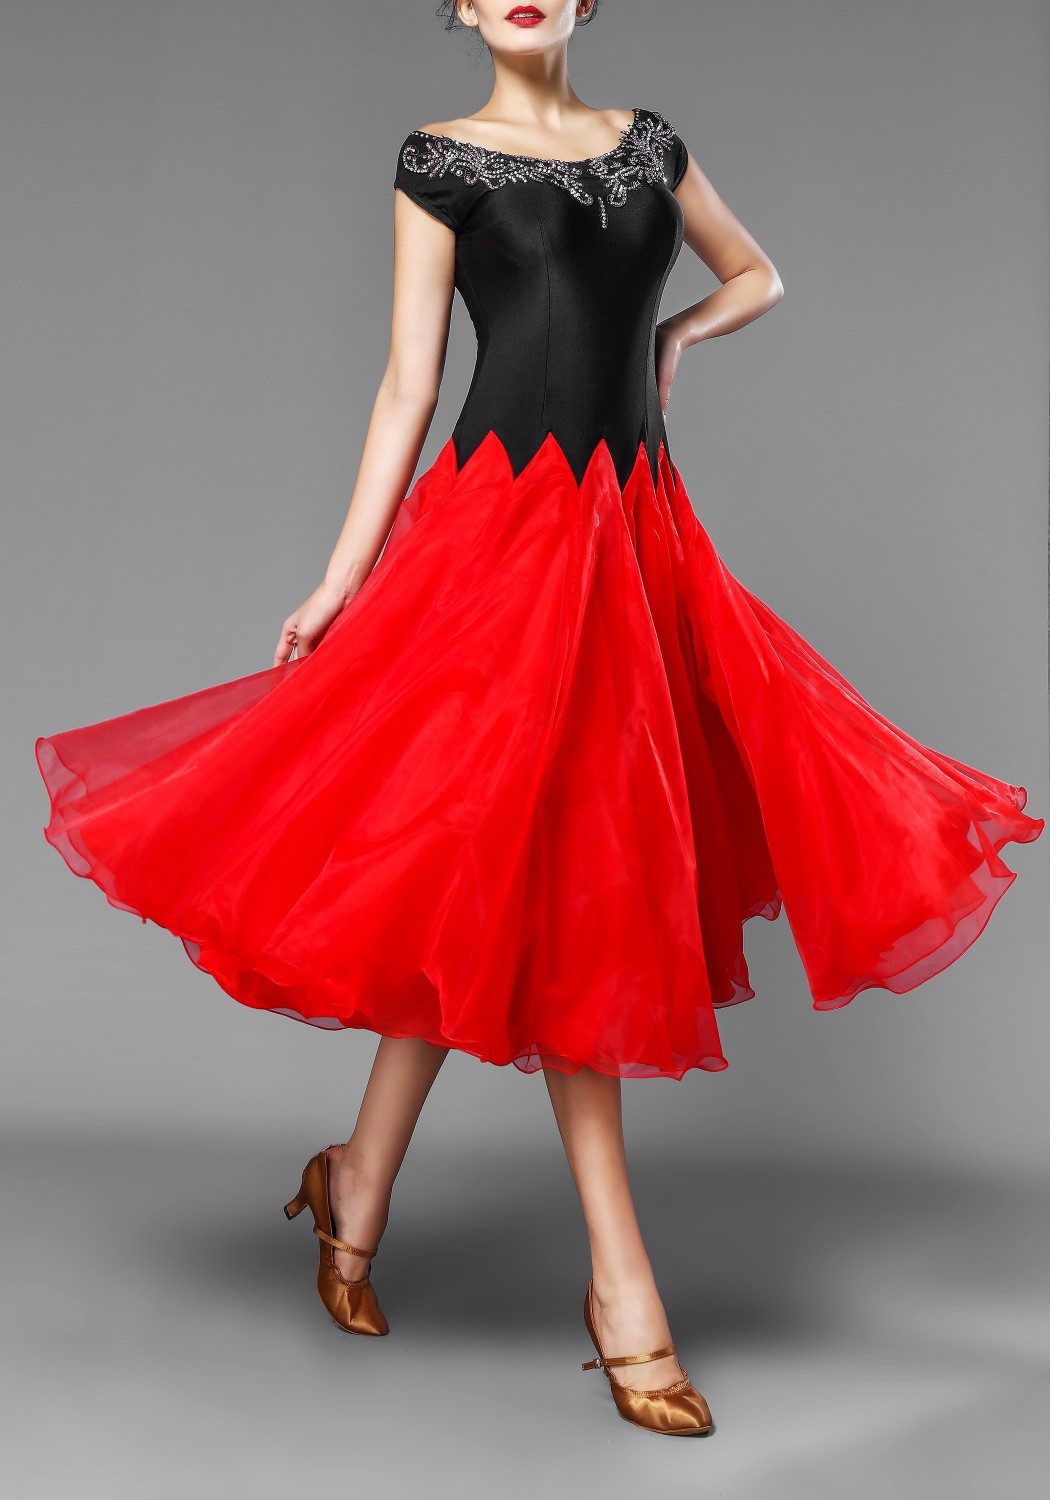 Black and Red Ballroom 3 Layers Practice Competition Dress